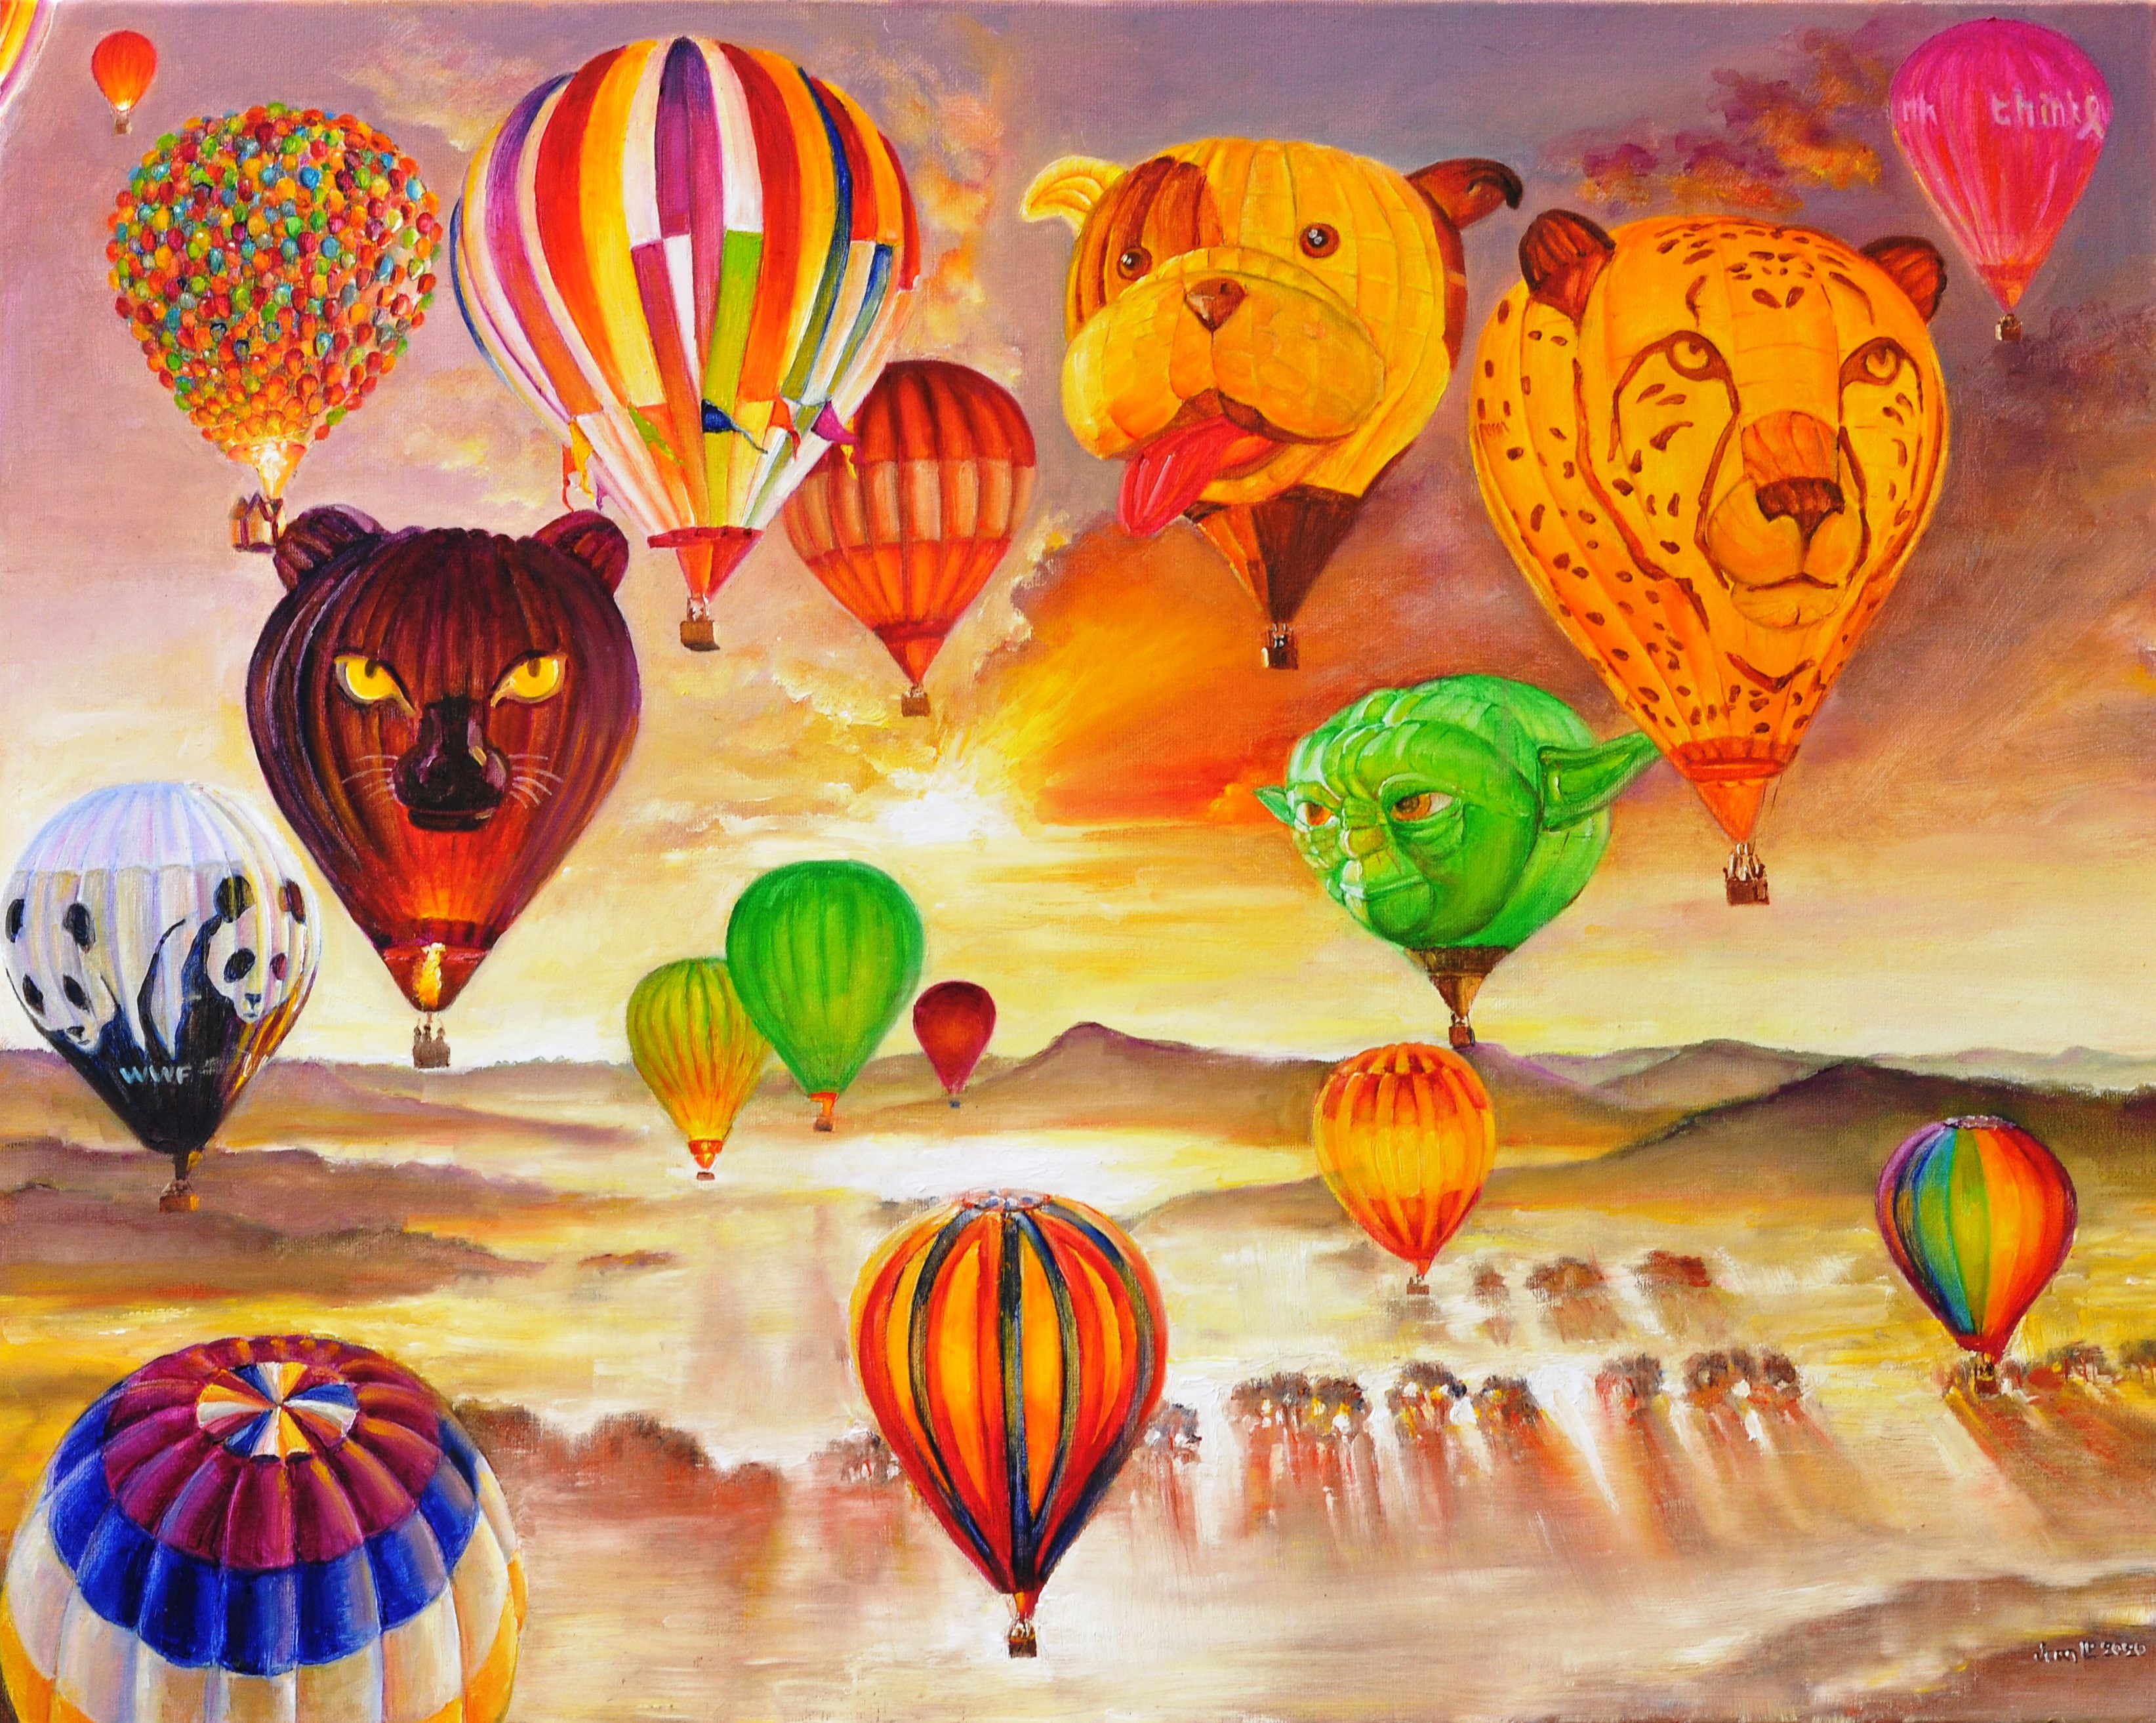 Hot air balloons 4 | Oil paint on linen | Year: 2020 | Dimensions: 80x100cm